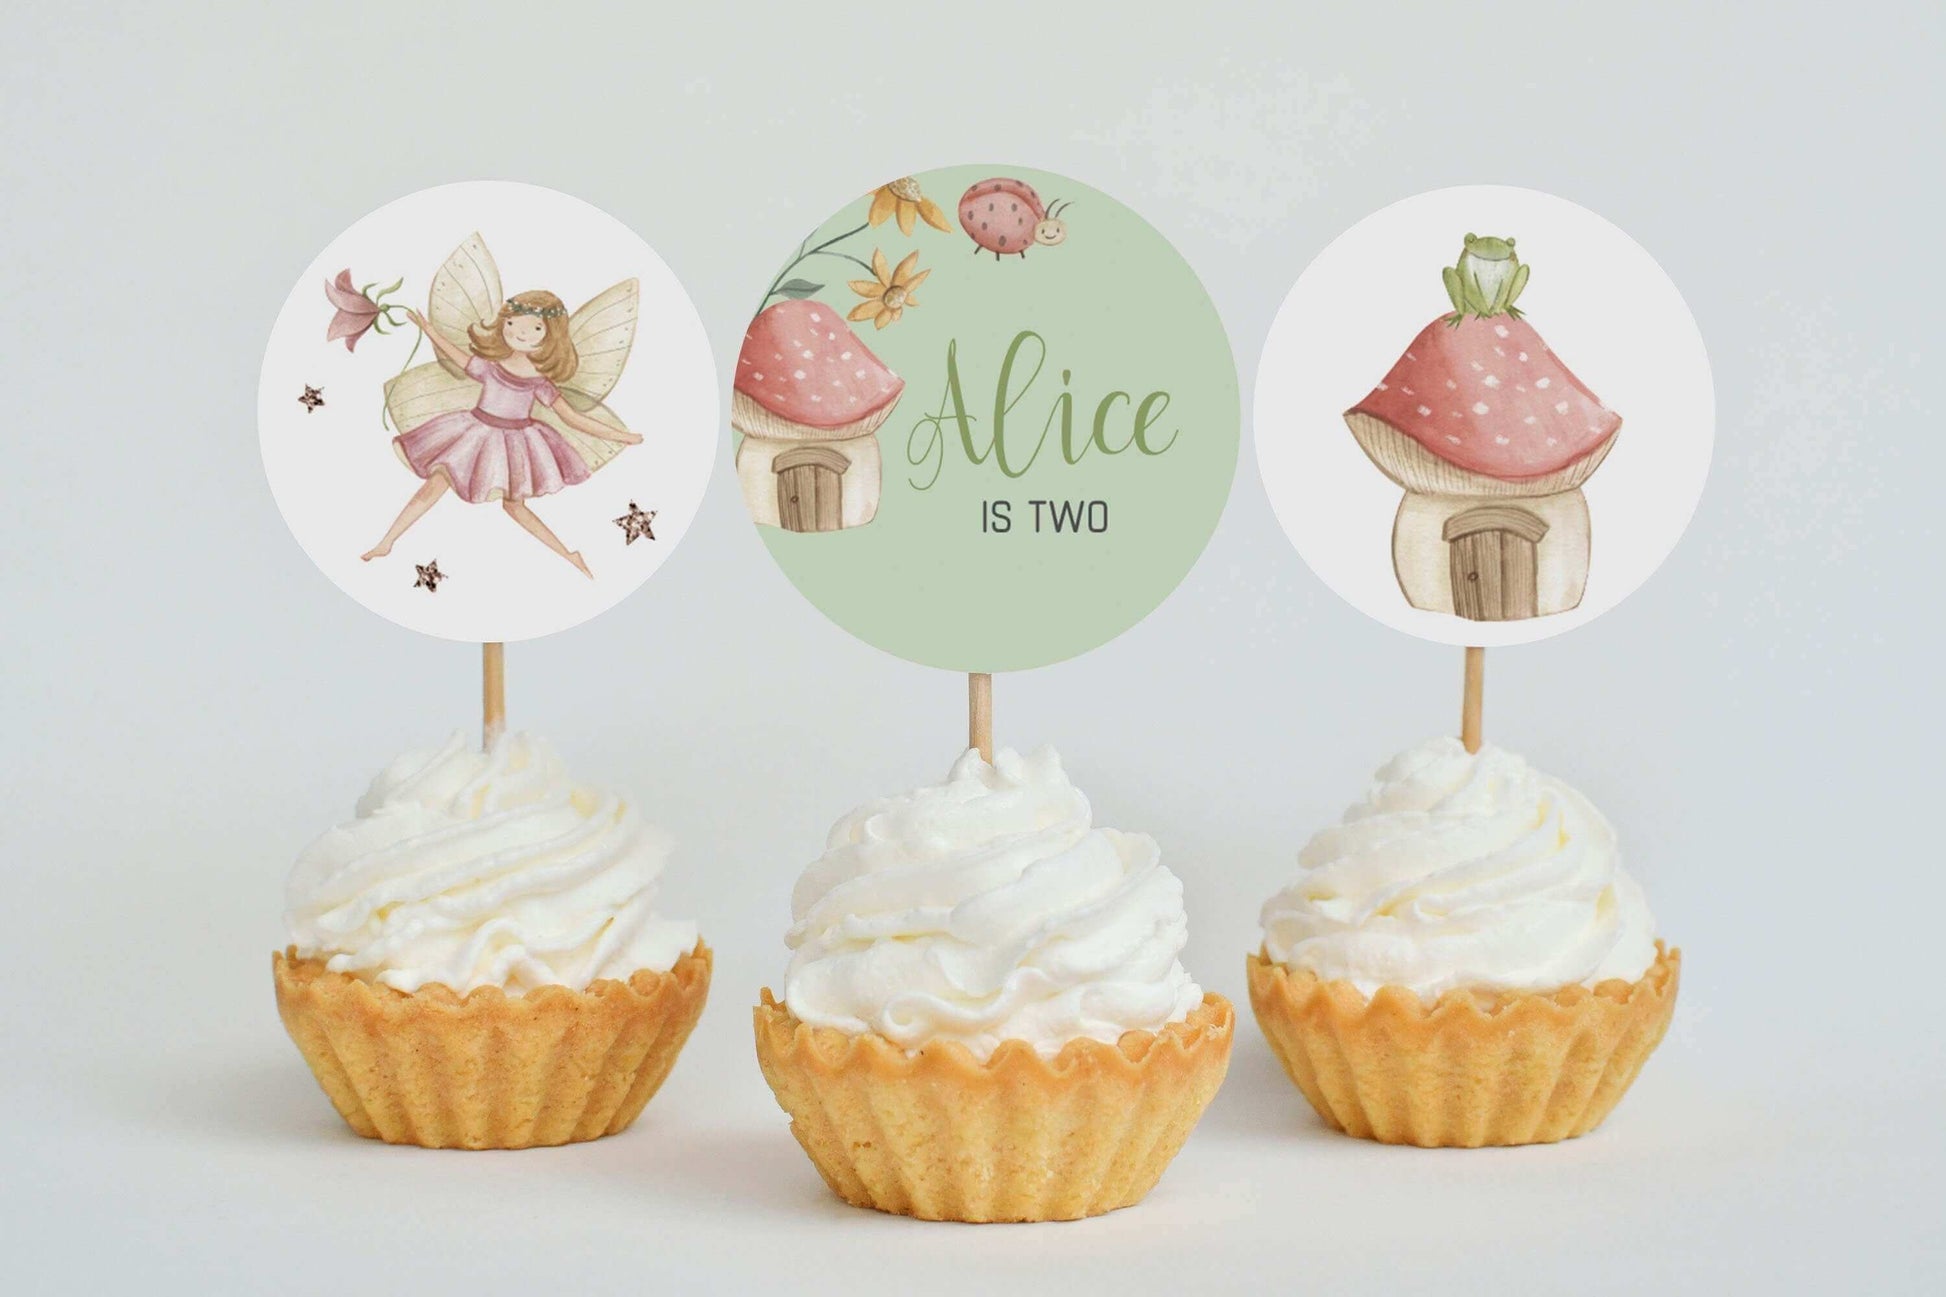 Editable Wildflower Fairies Sage Cupcake Toppers, Printable Fairy Birthday Party Decorations, Wildflower Cupcakes Tags REF017 - Digitally Printables